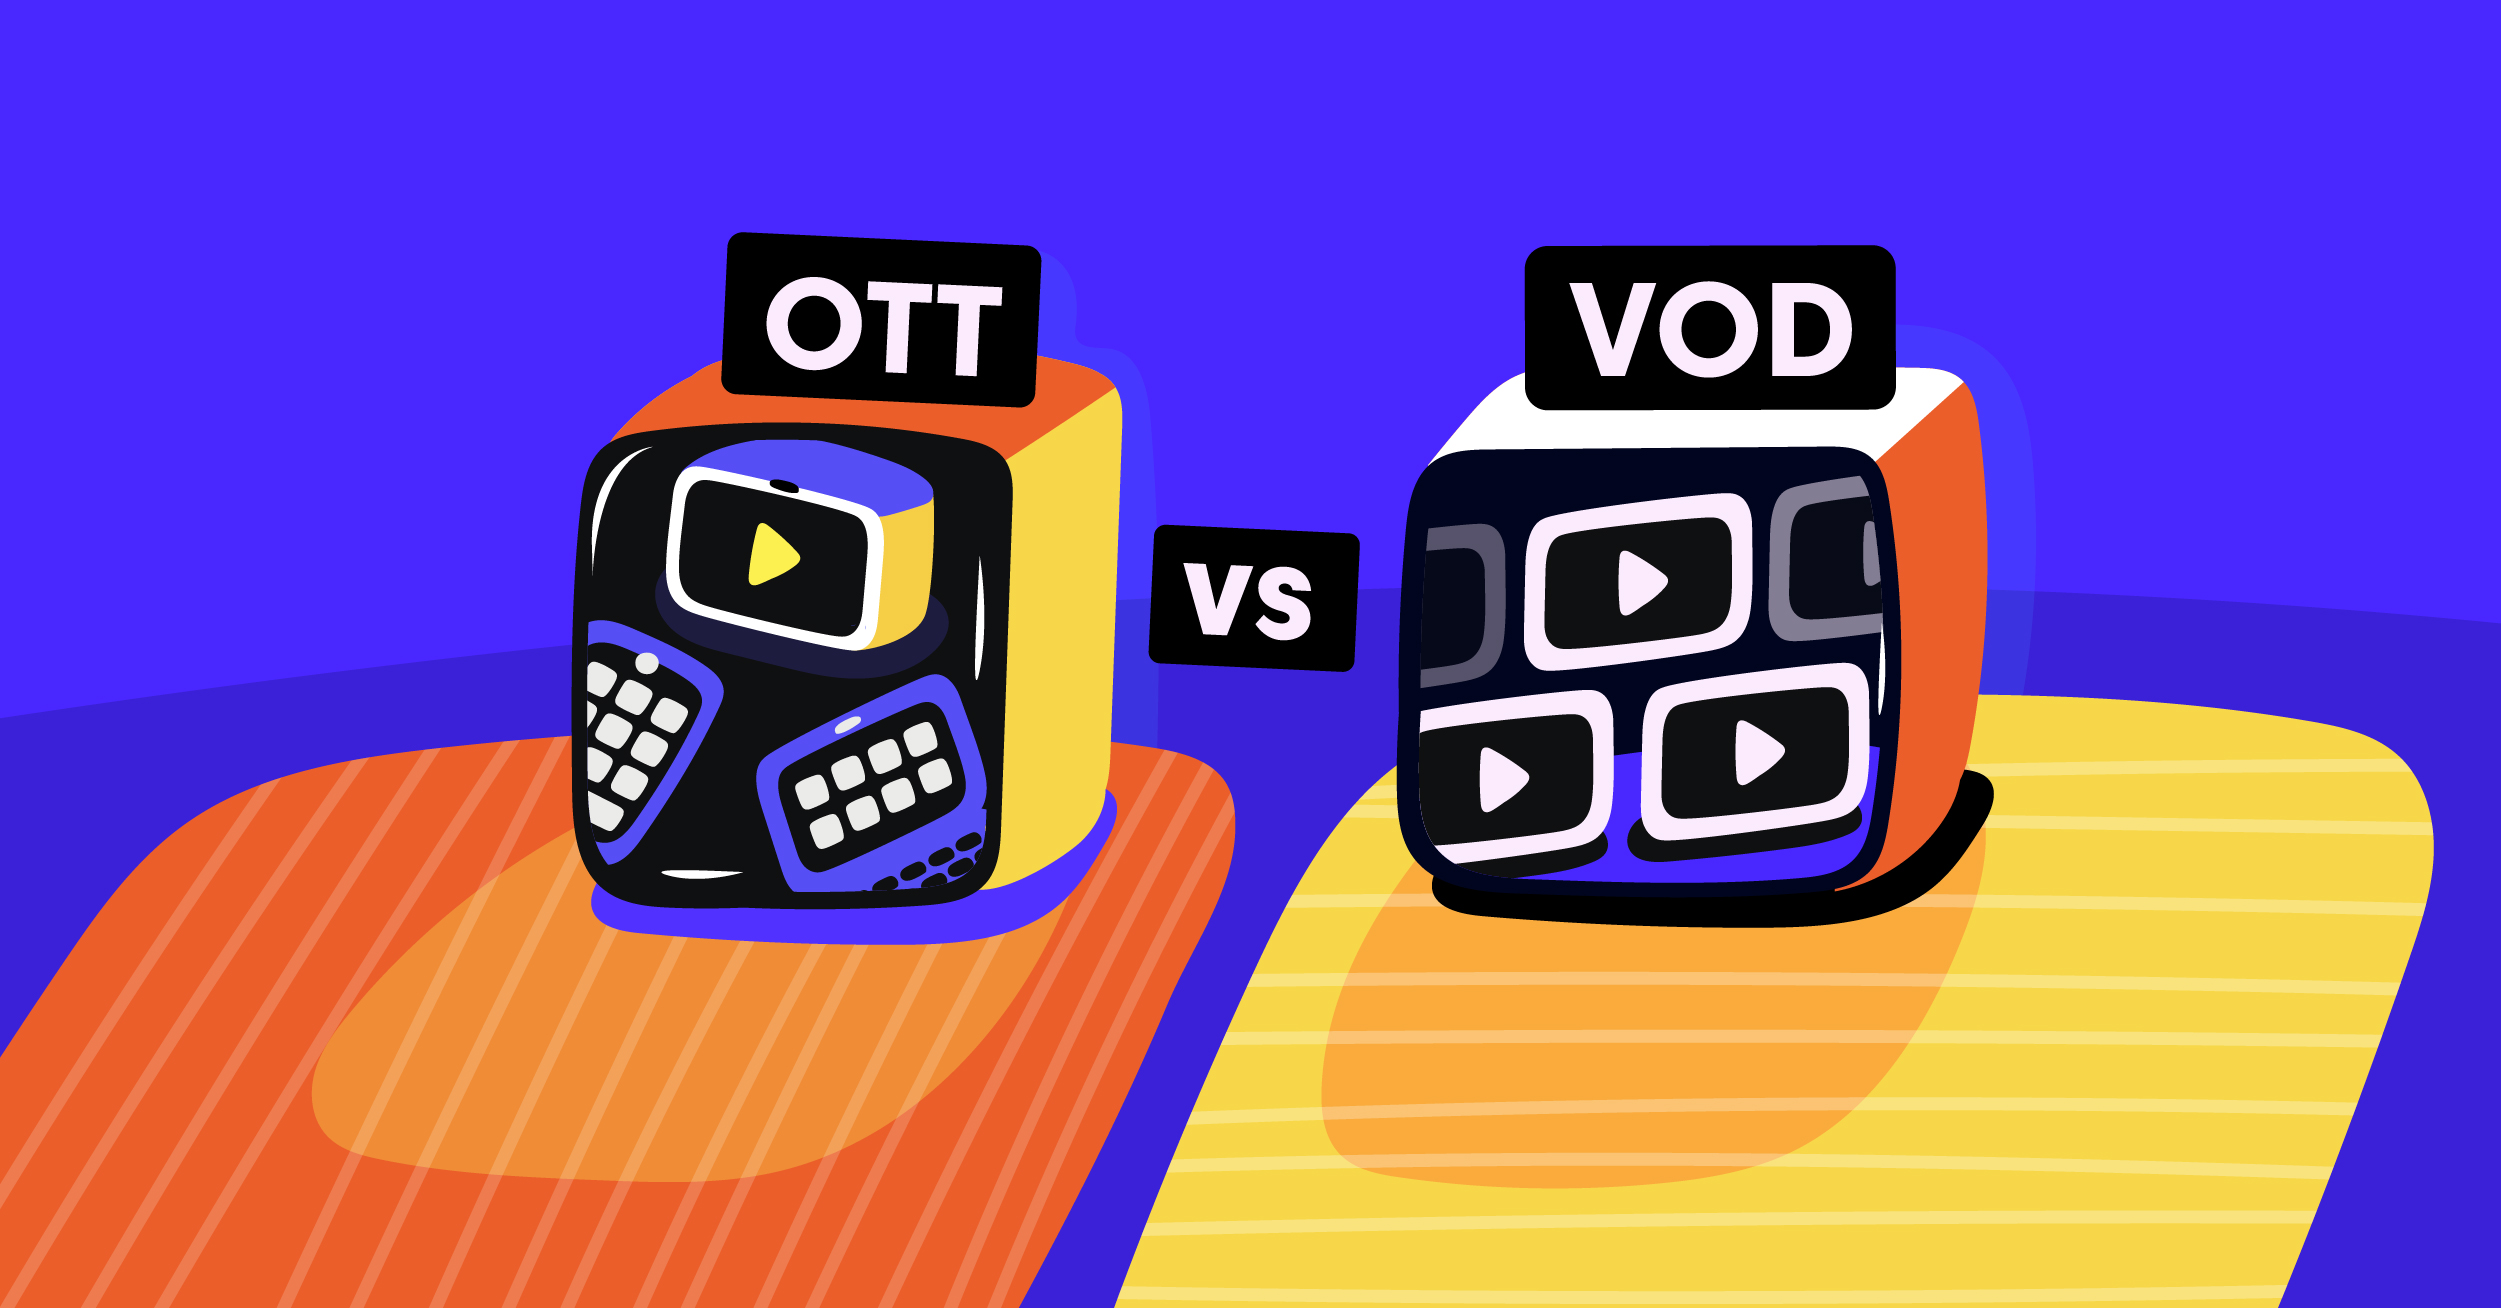 OTT vs. VOD - The difference between OTT and VOD